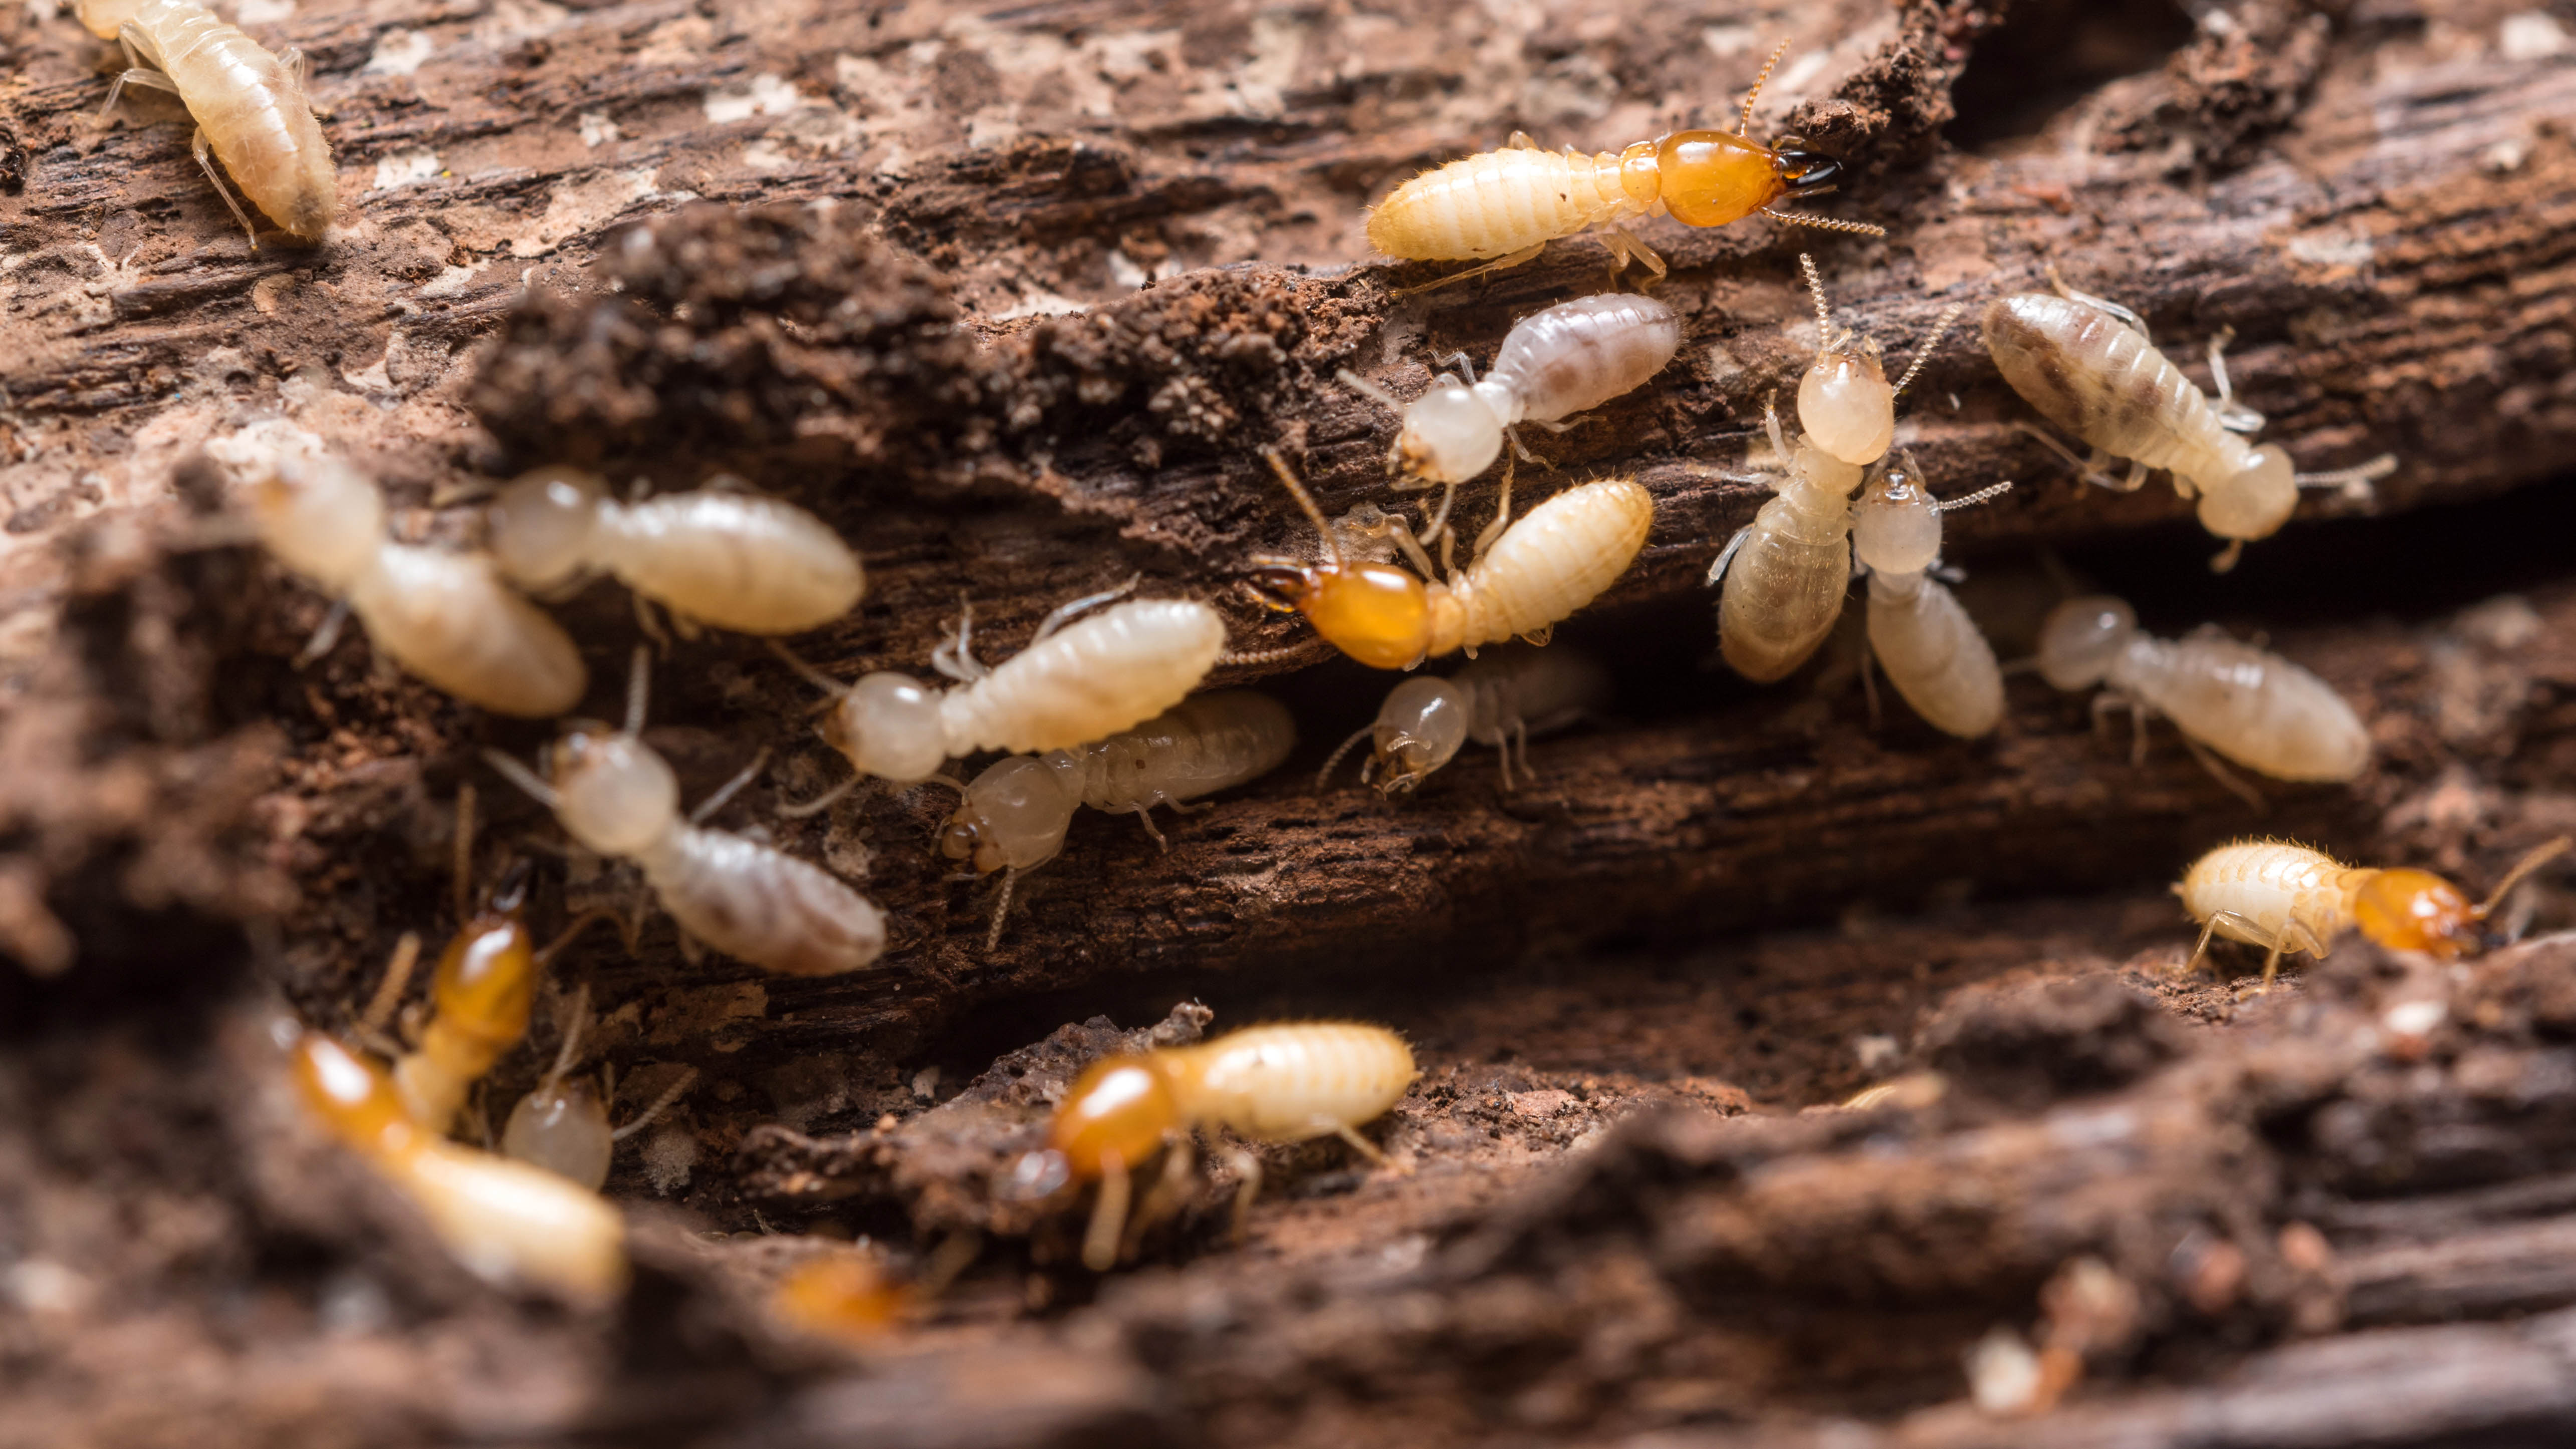 How to get rid of termites naturally – 6 ways to save your home from pests